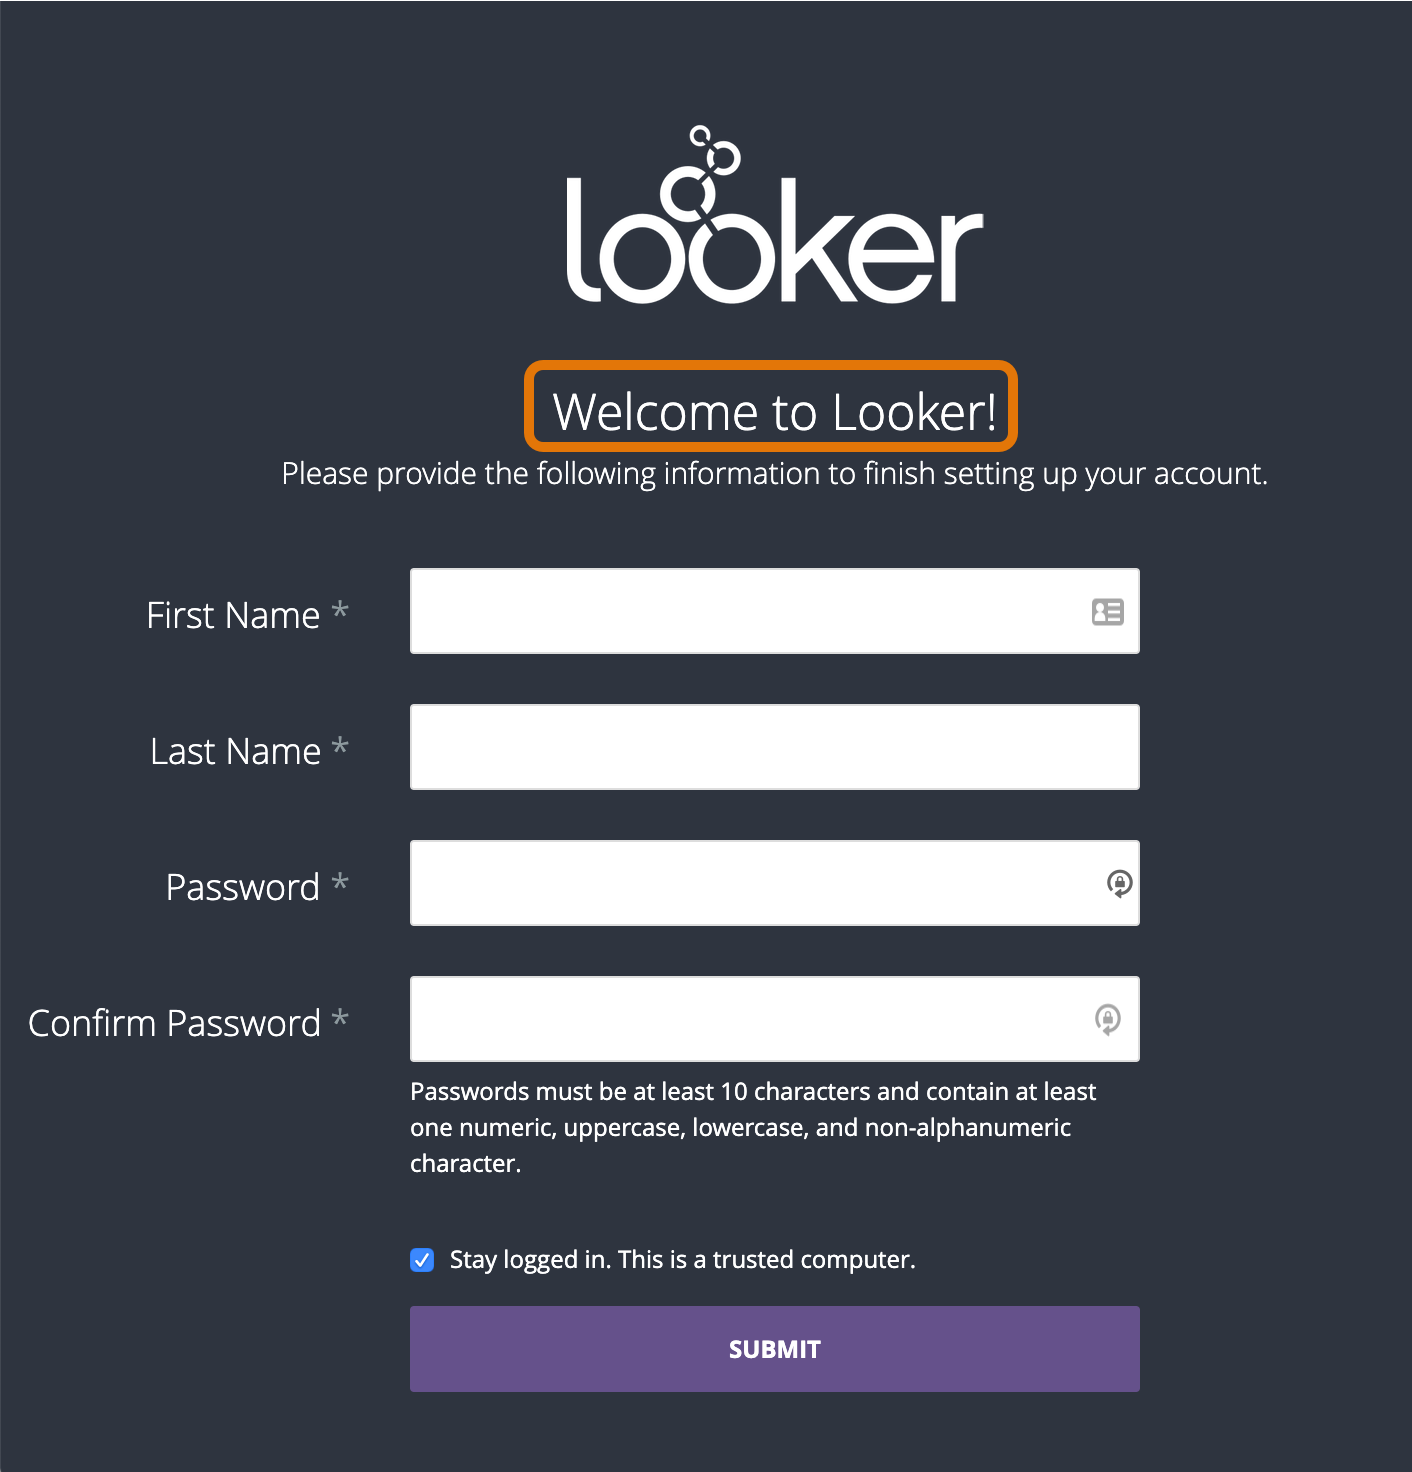 A screenshot of the Looker account setup page. There is a Looker logo at the top of the page, followed by the text 'Welcome to Looker!'